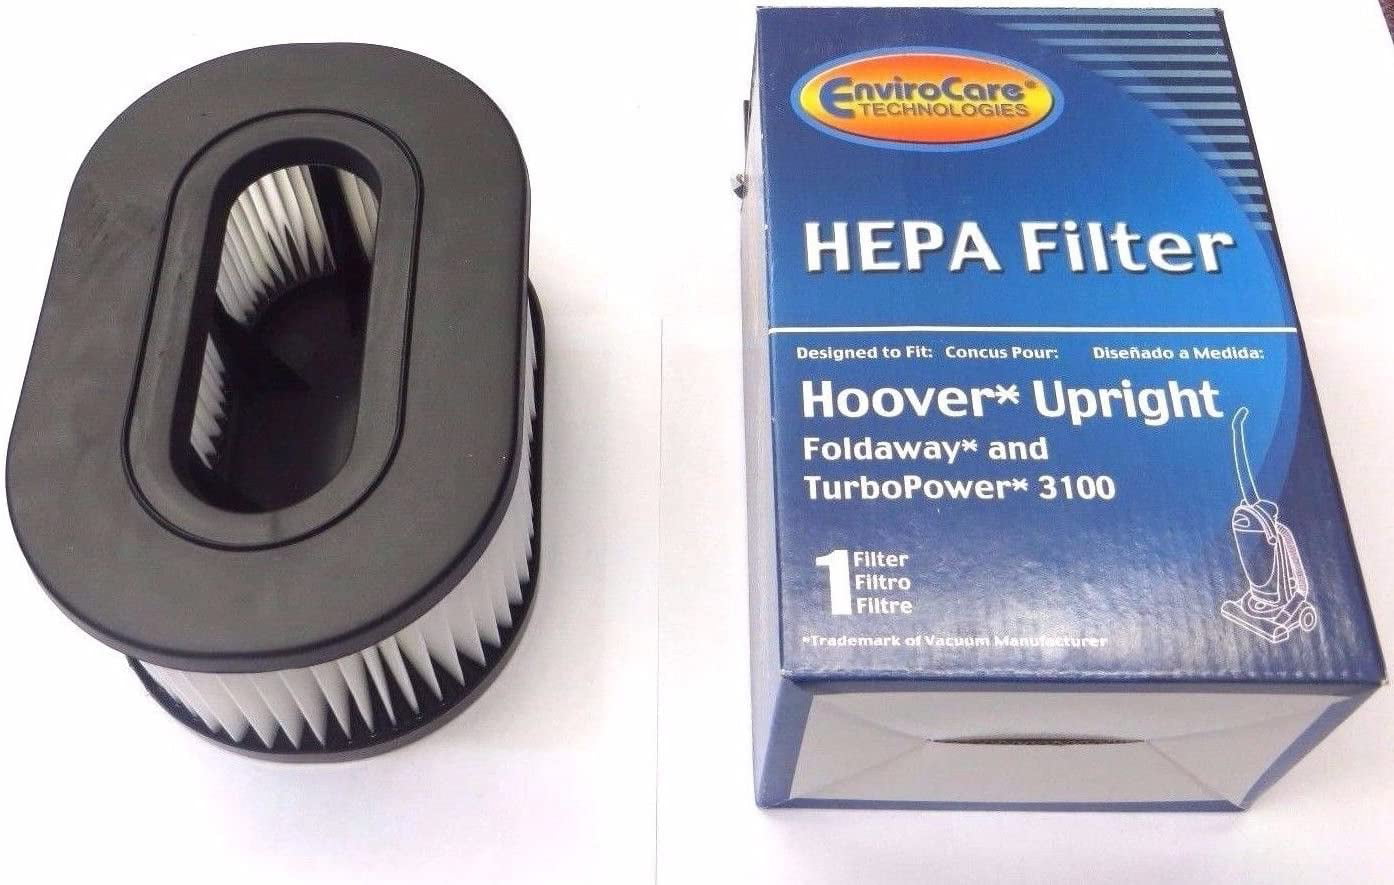 EnviroCare Replacement HEPA Vacuum Filter for Hoover Fold Away Turbo Power 3100 